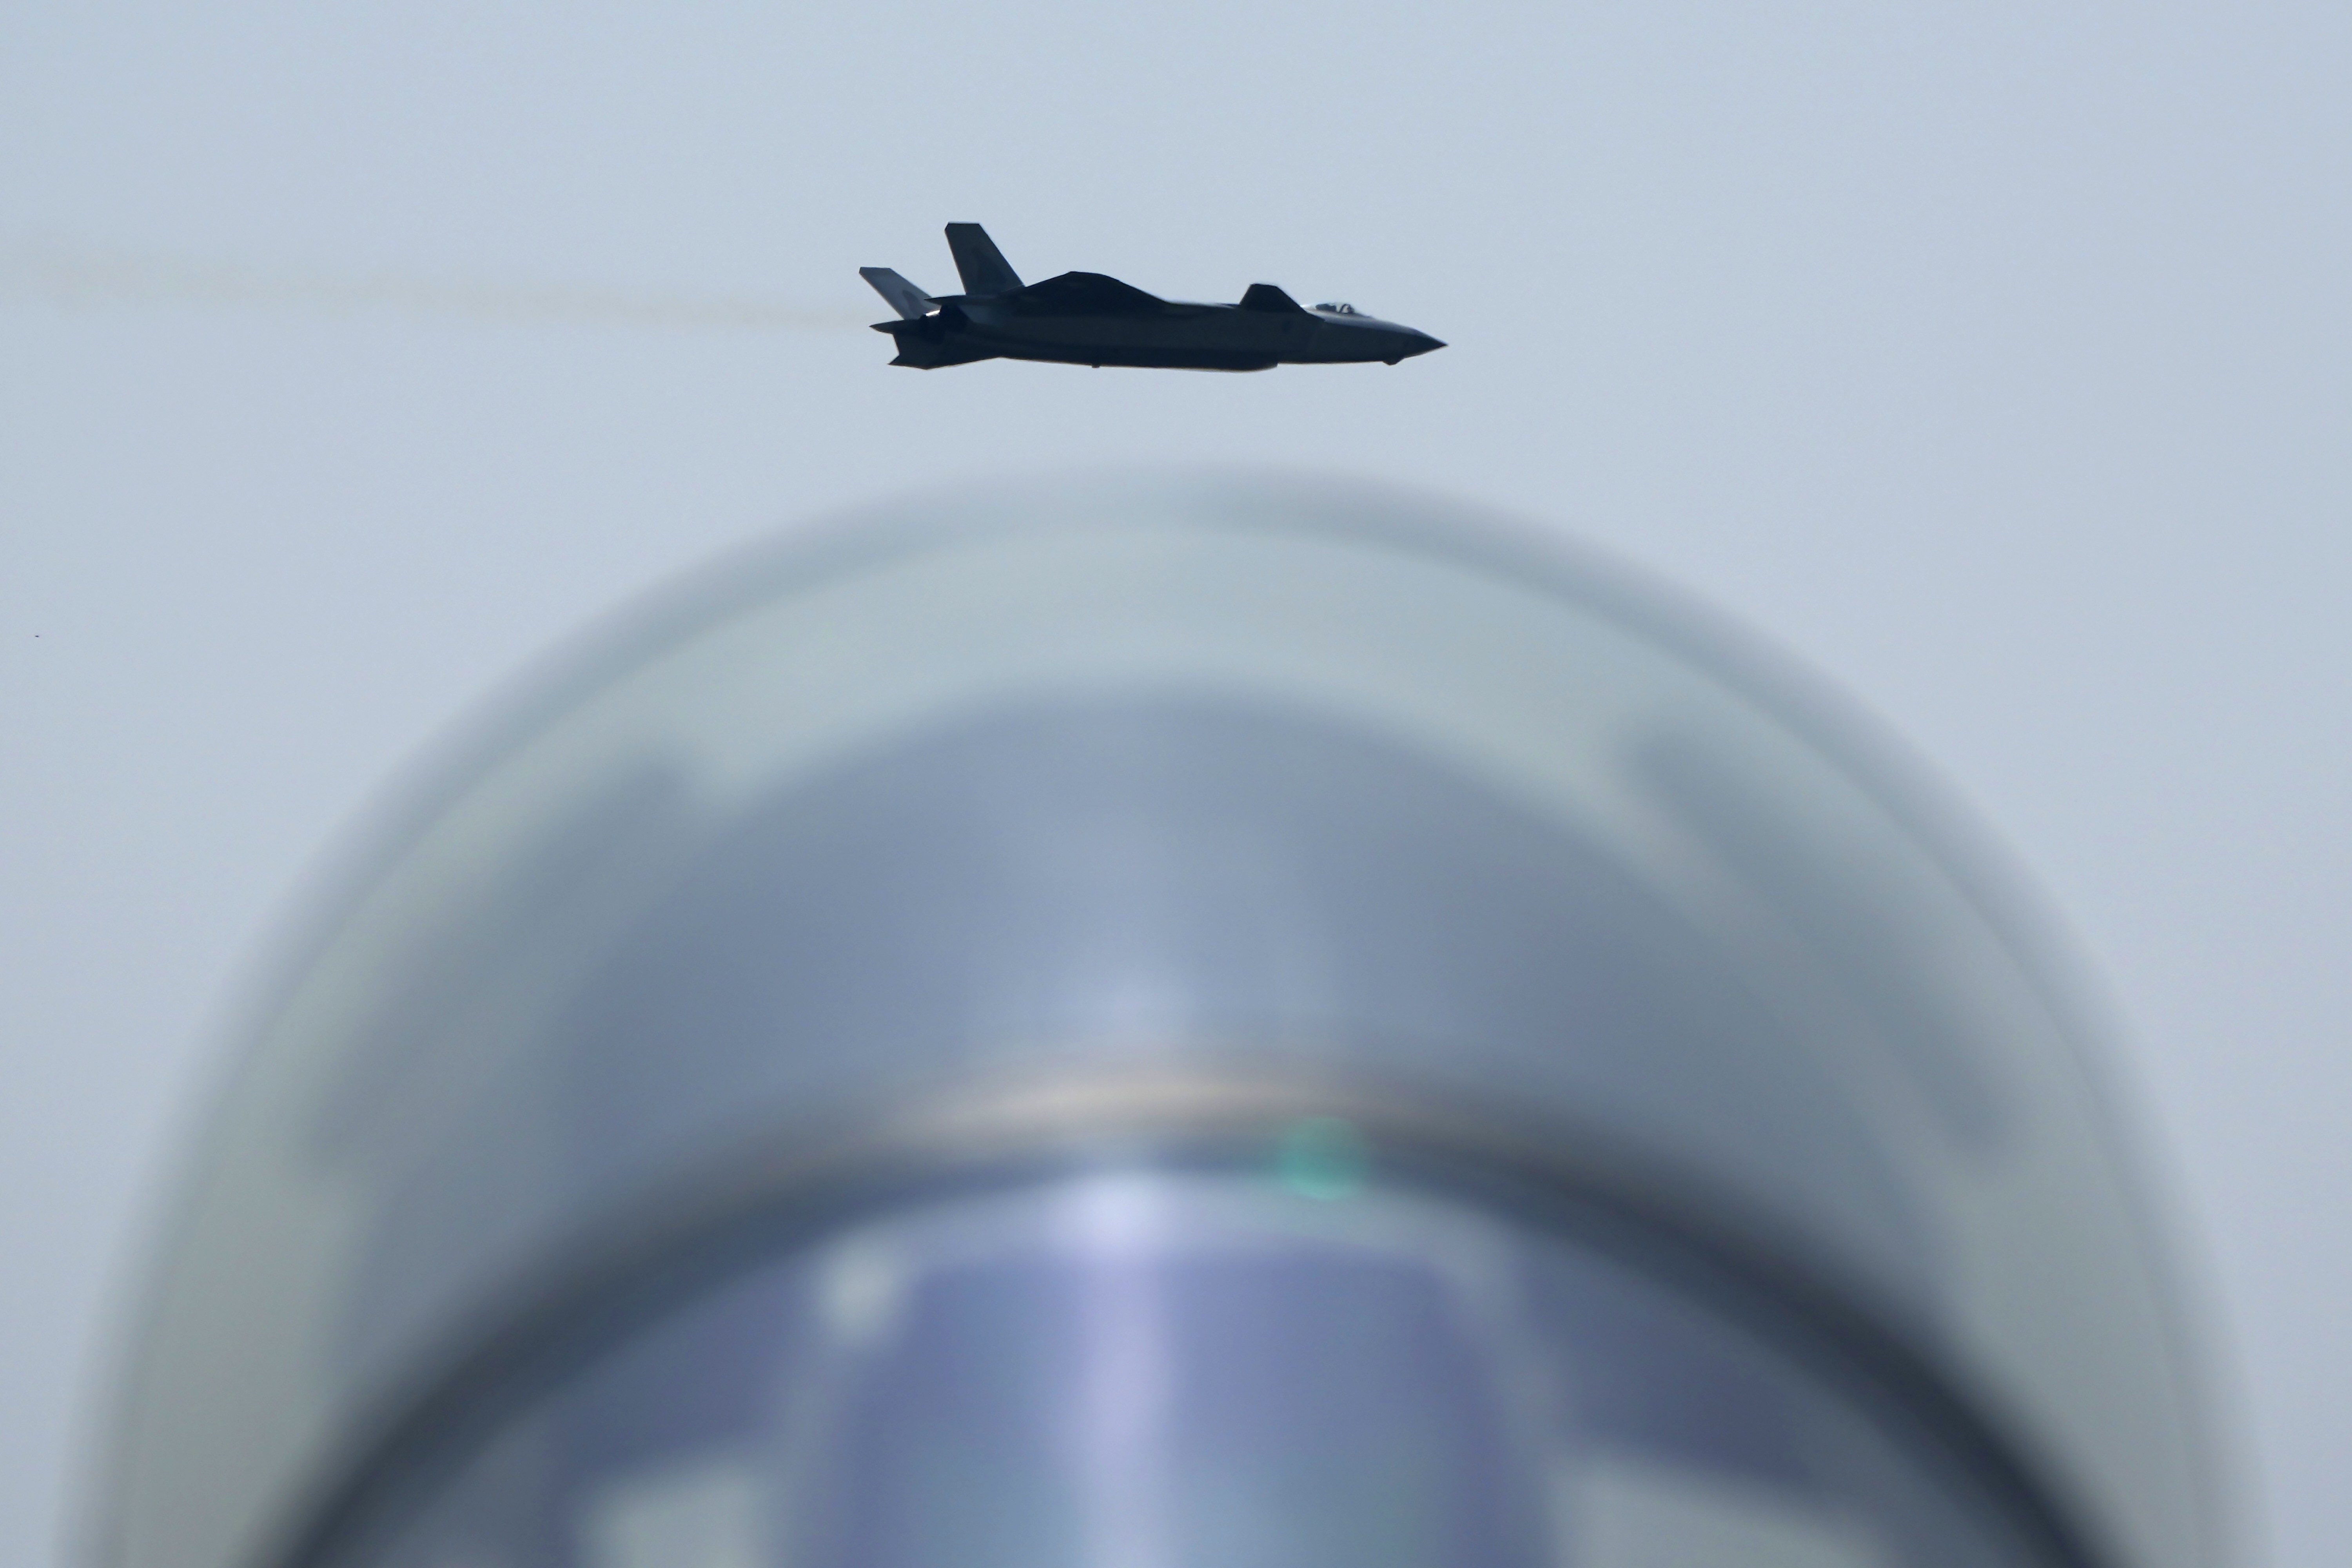 A Chinese J-20 stealth fighter jet performs at the Zhuhai Airshow on Wednesday. Photo: AP